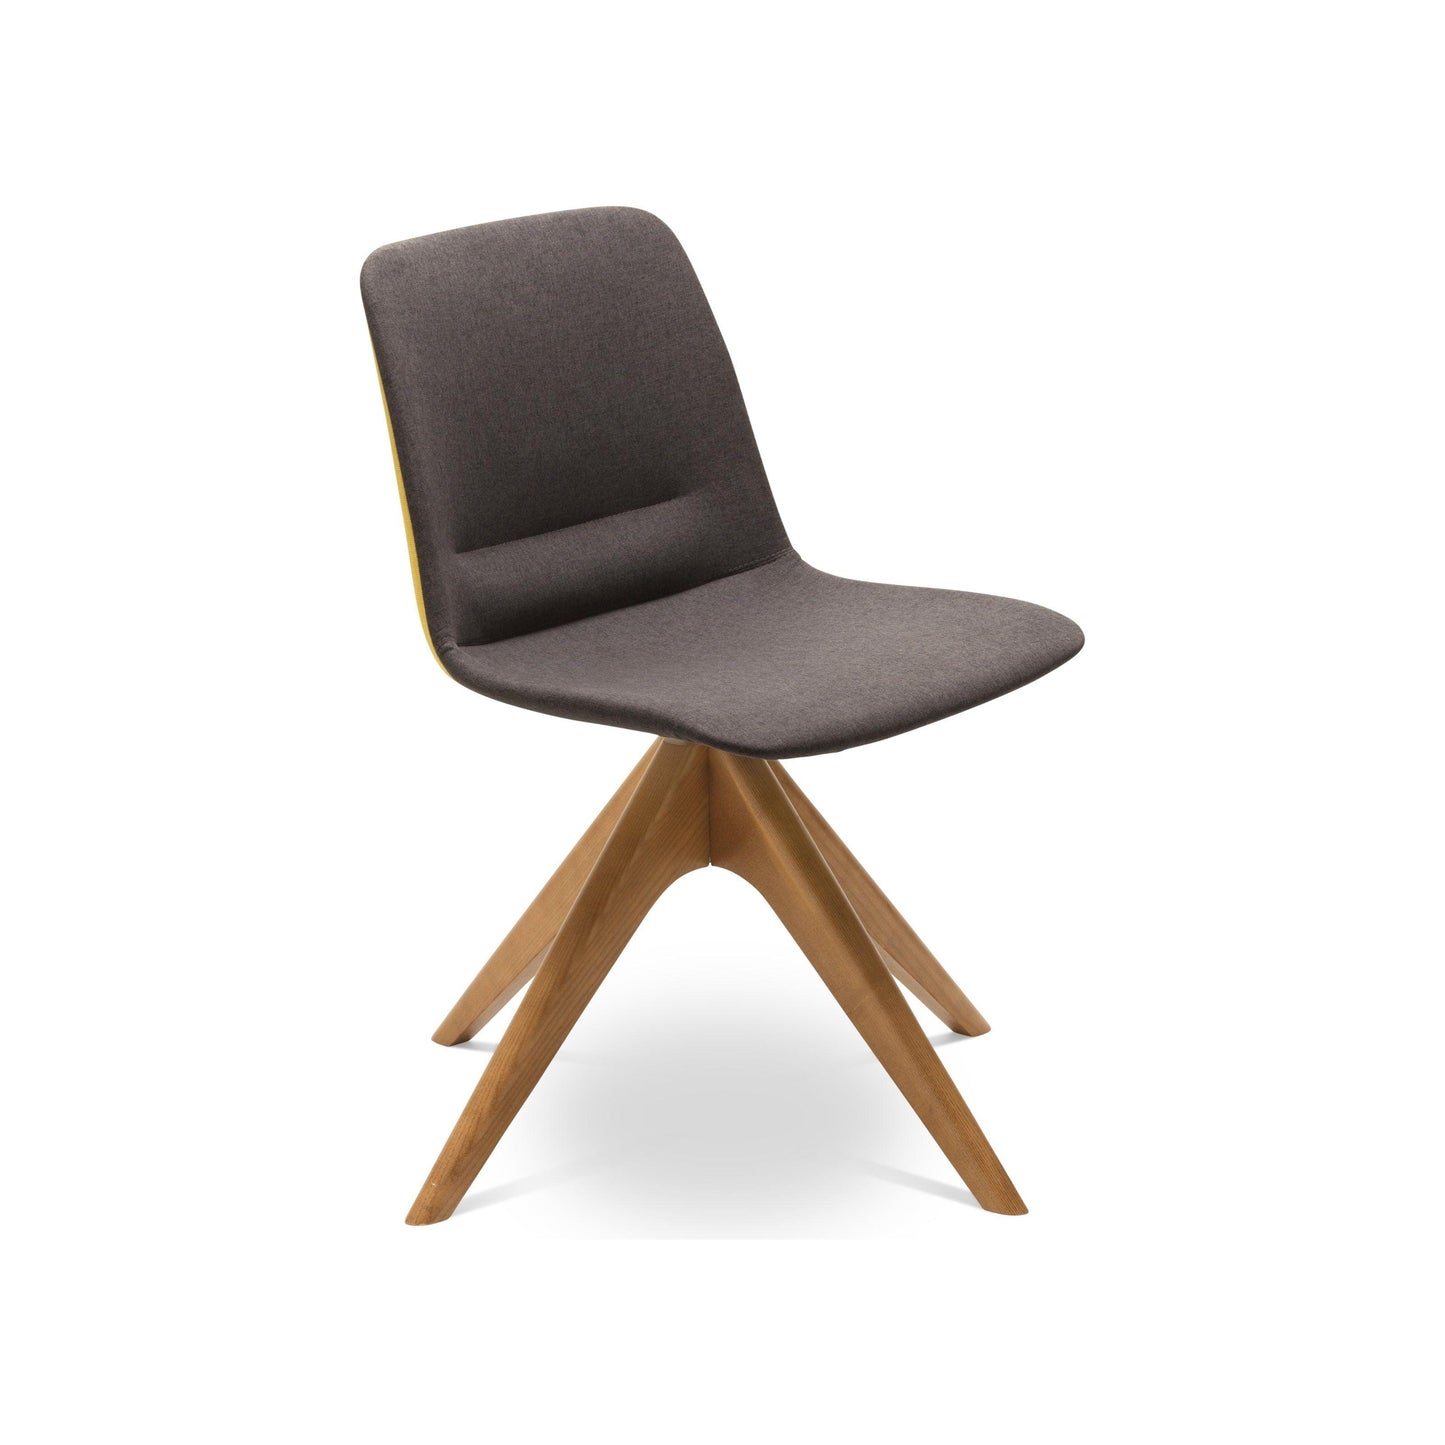 Unica Timber Swivel Upholstered Chair